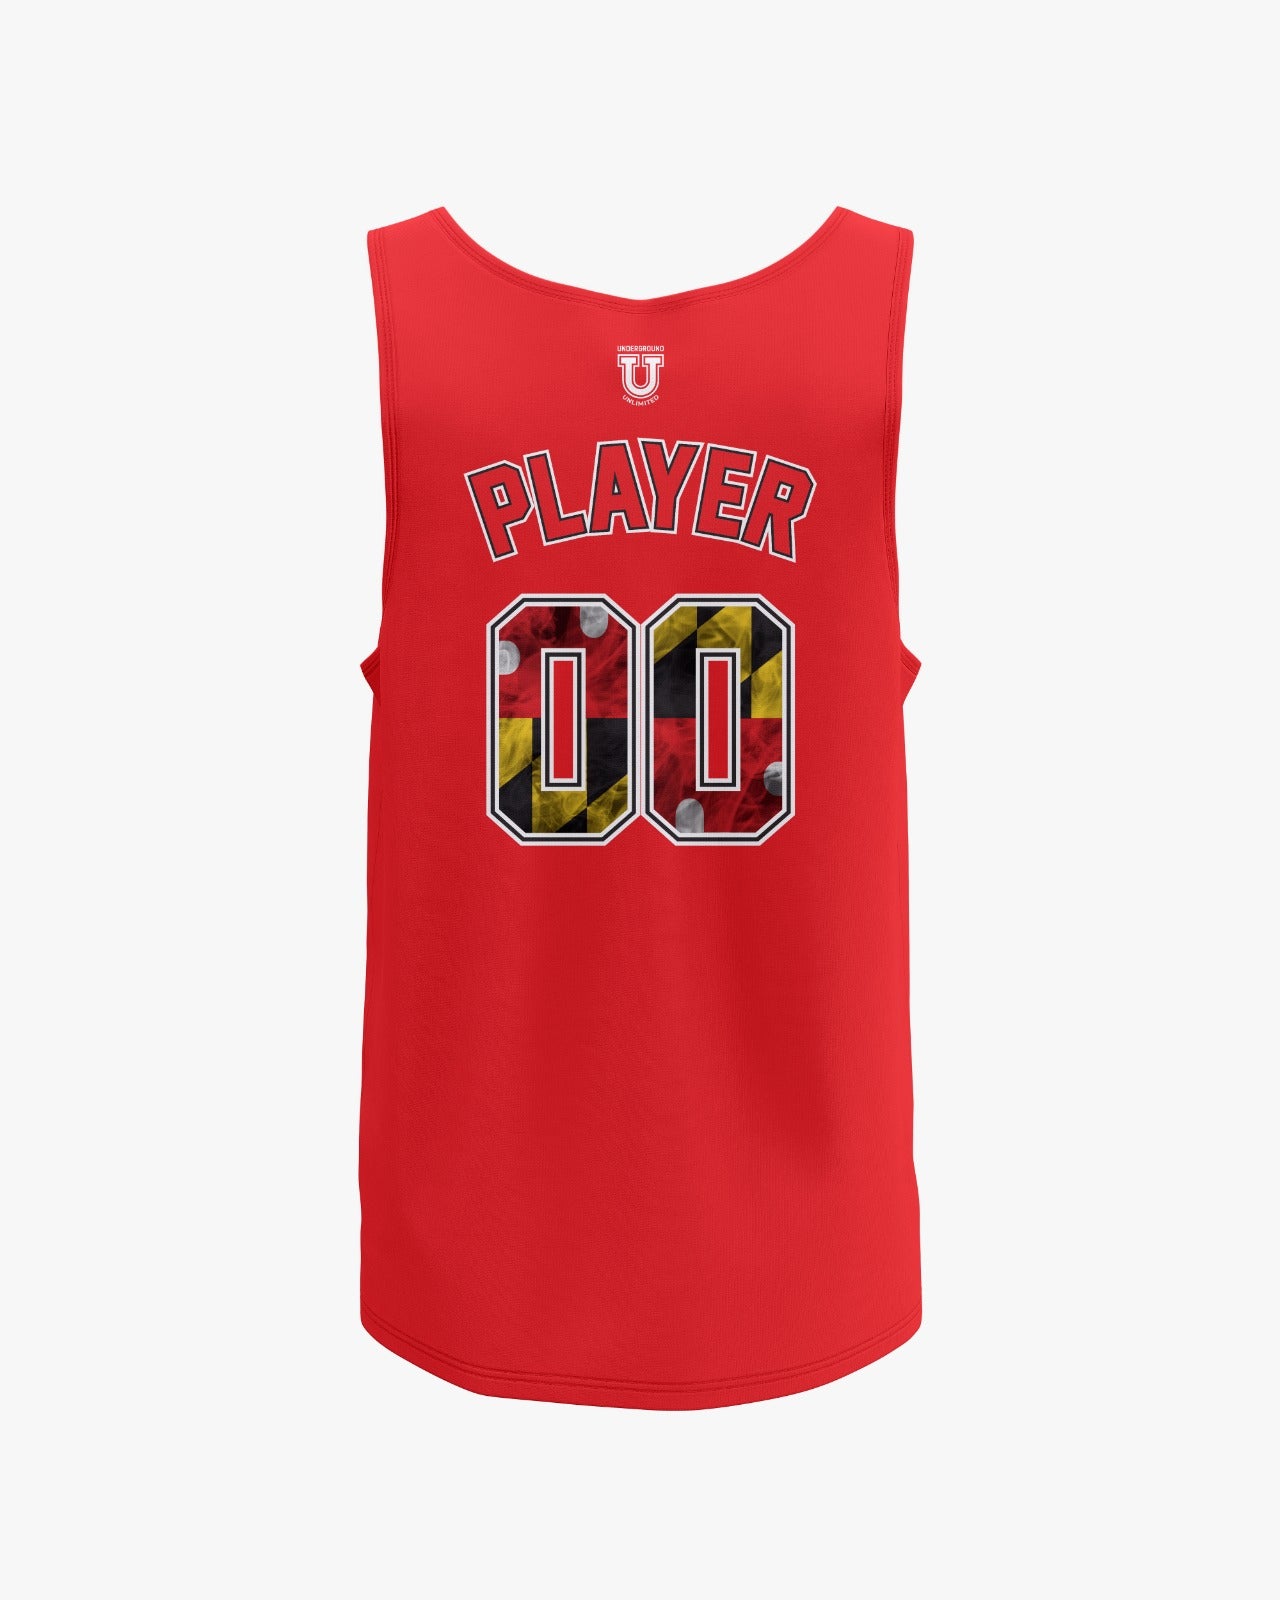 Maryland Clash Dri Tech Tank Top ~ Solid Red